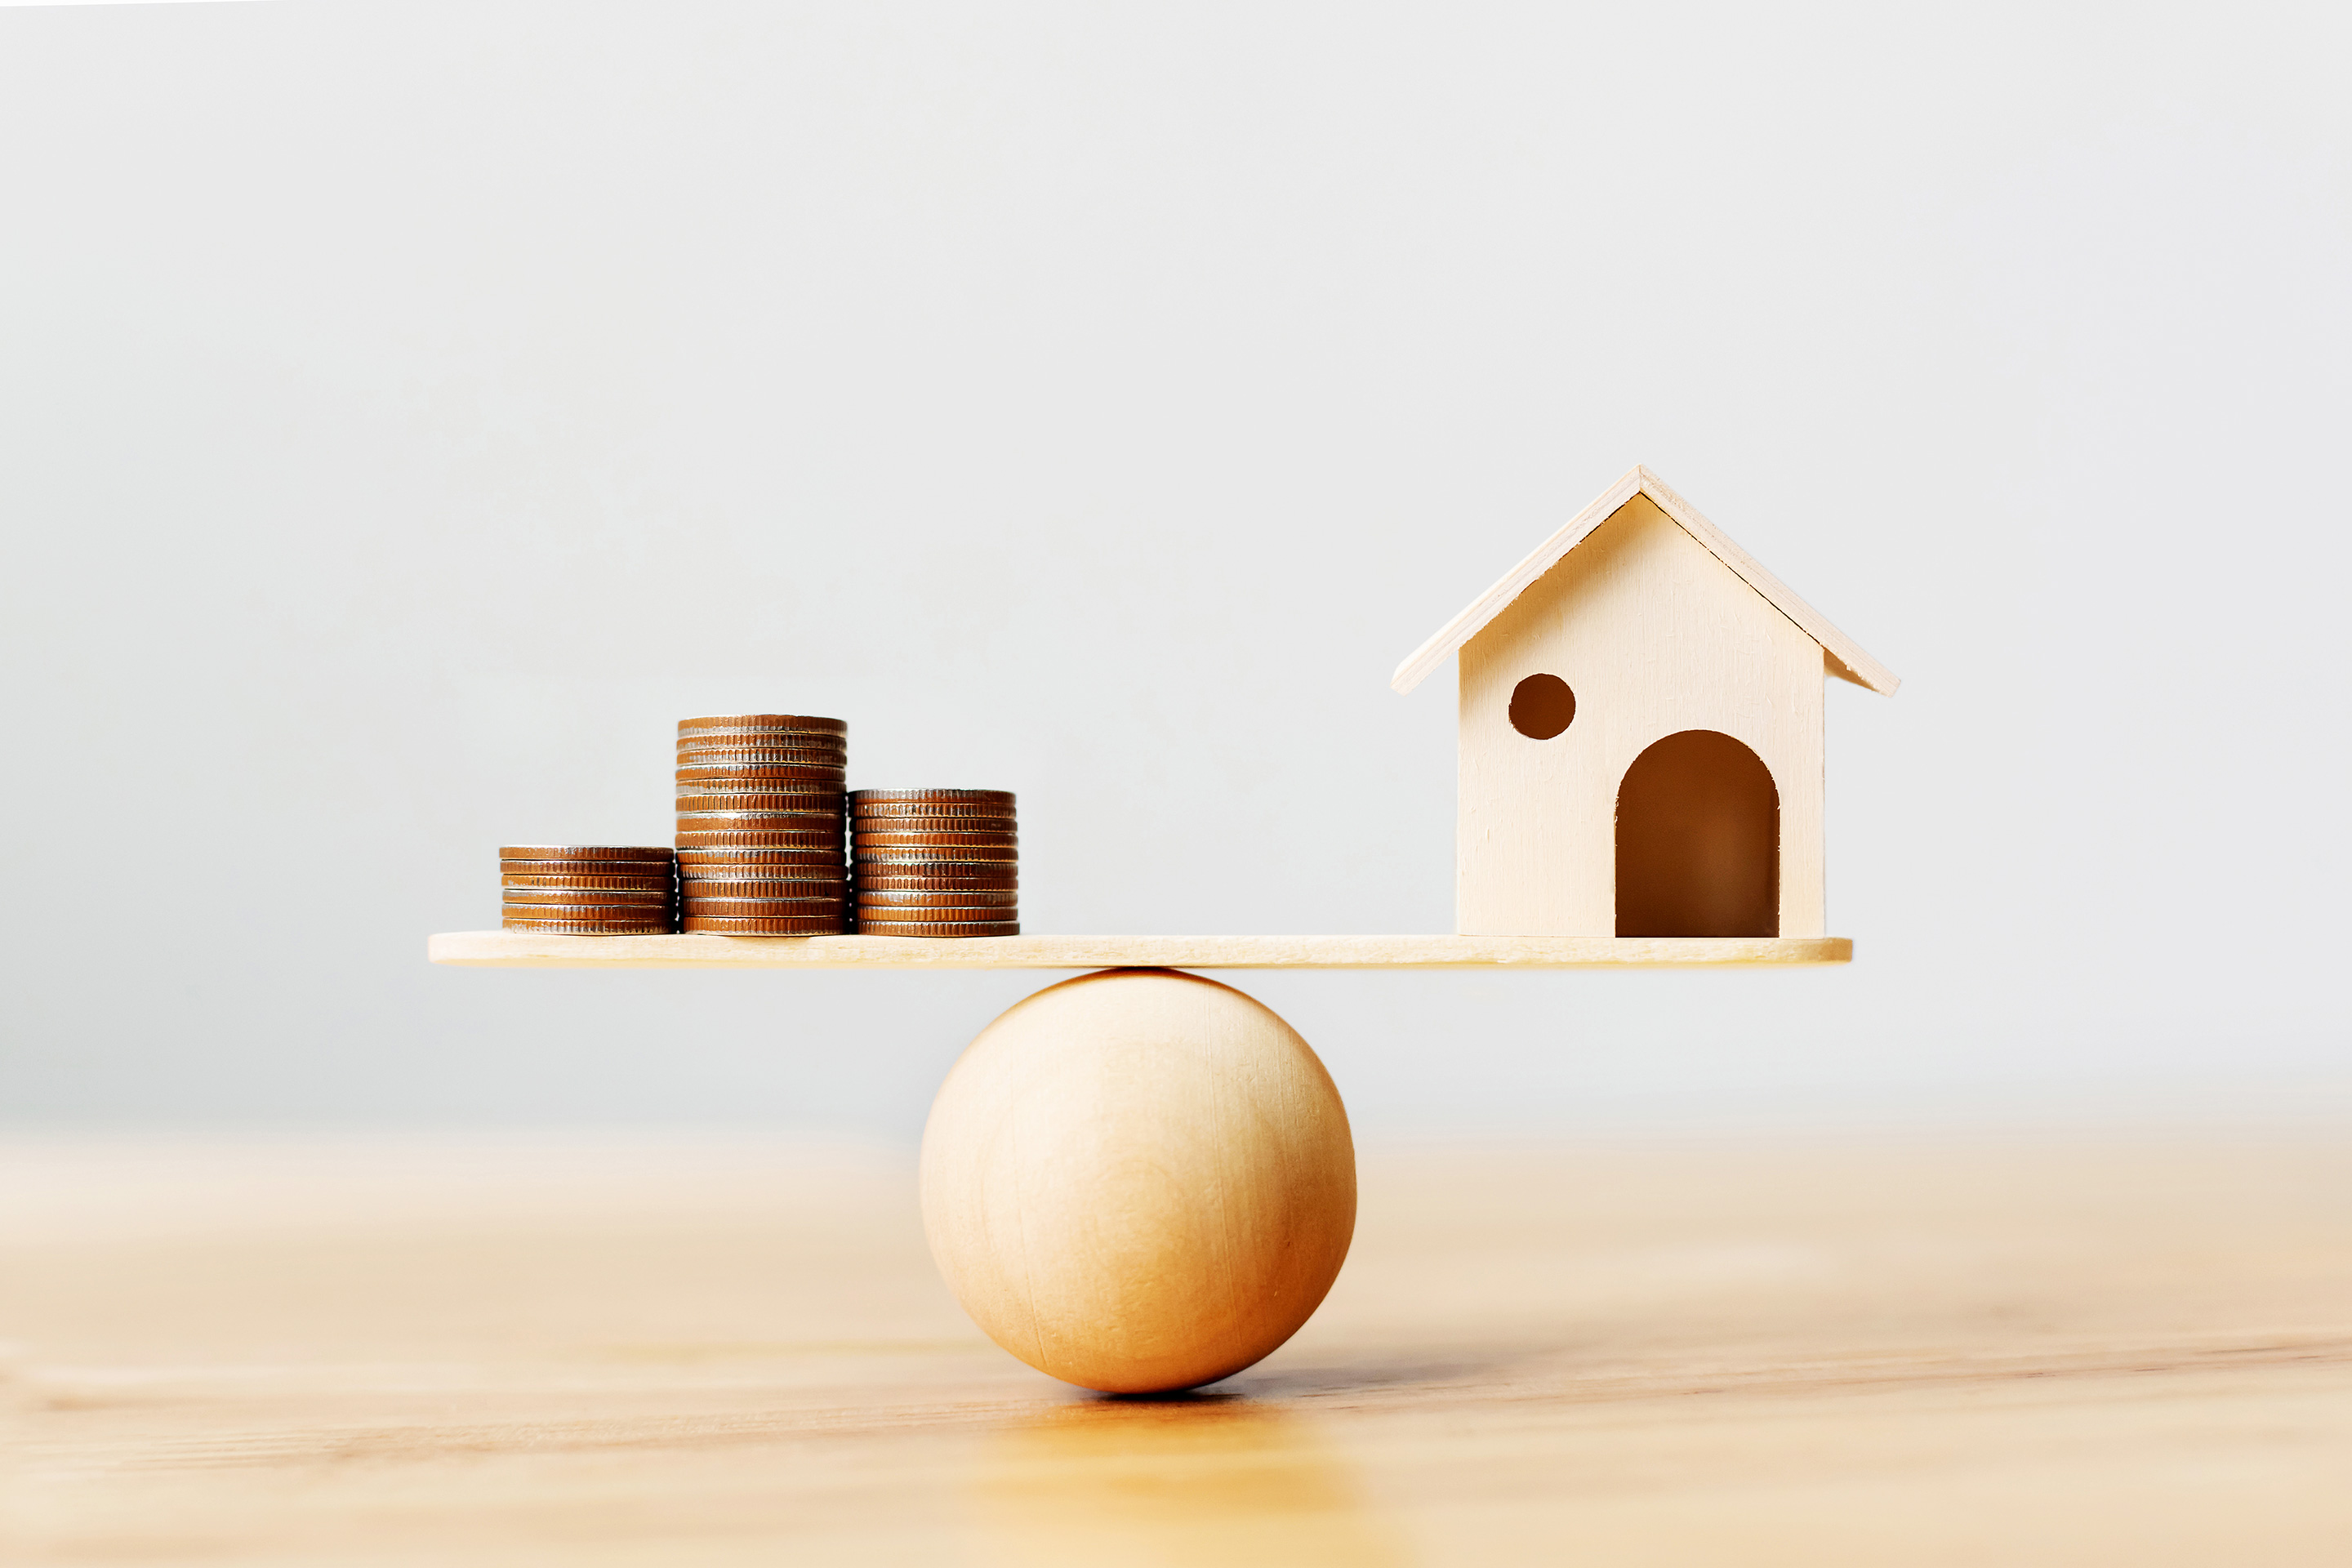 Image of a wooden ball balancing coins on one end and a small miniature wood house on the opposite end